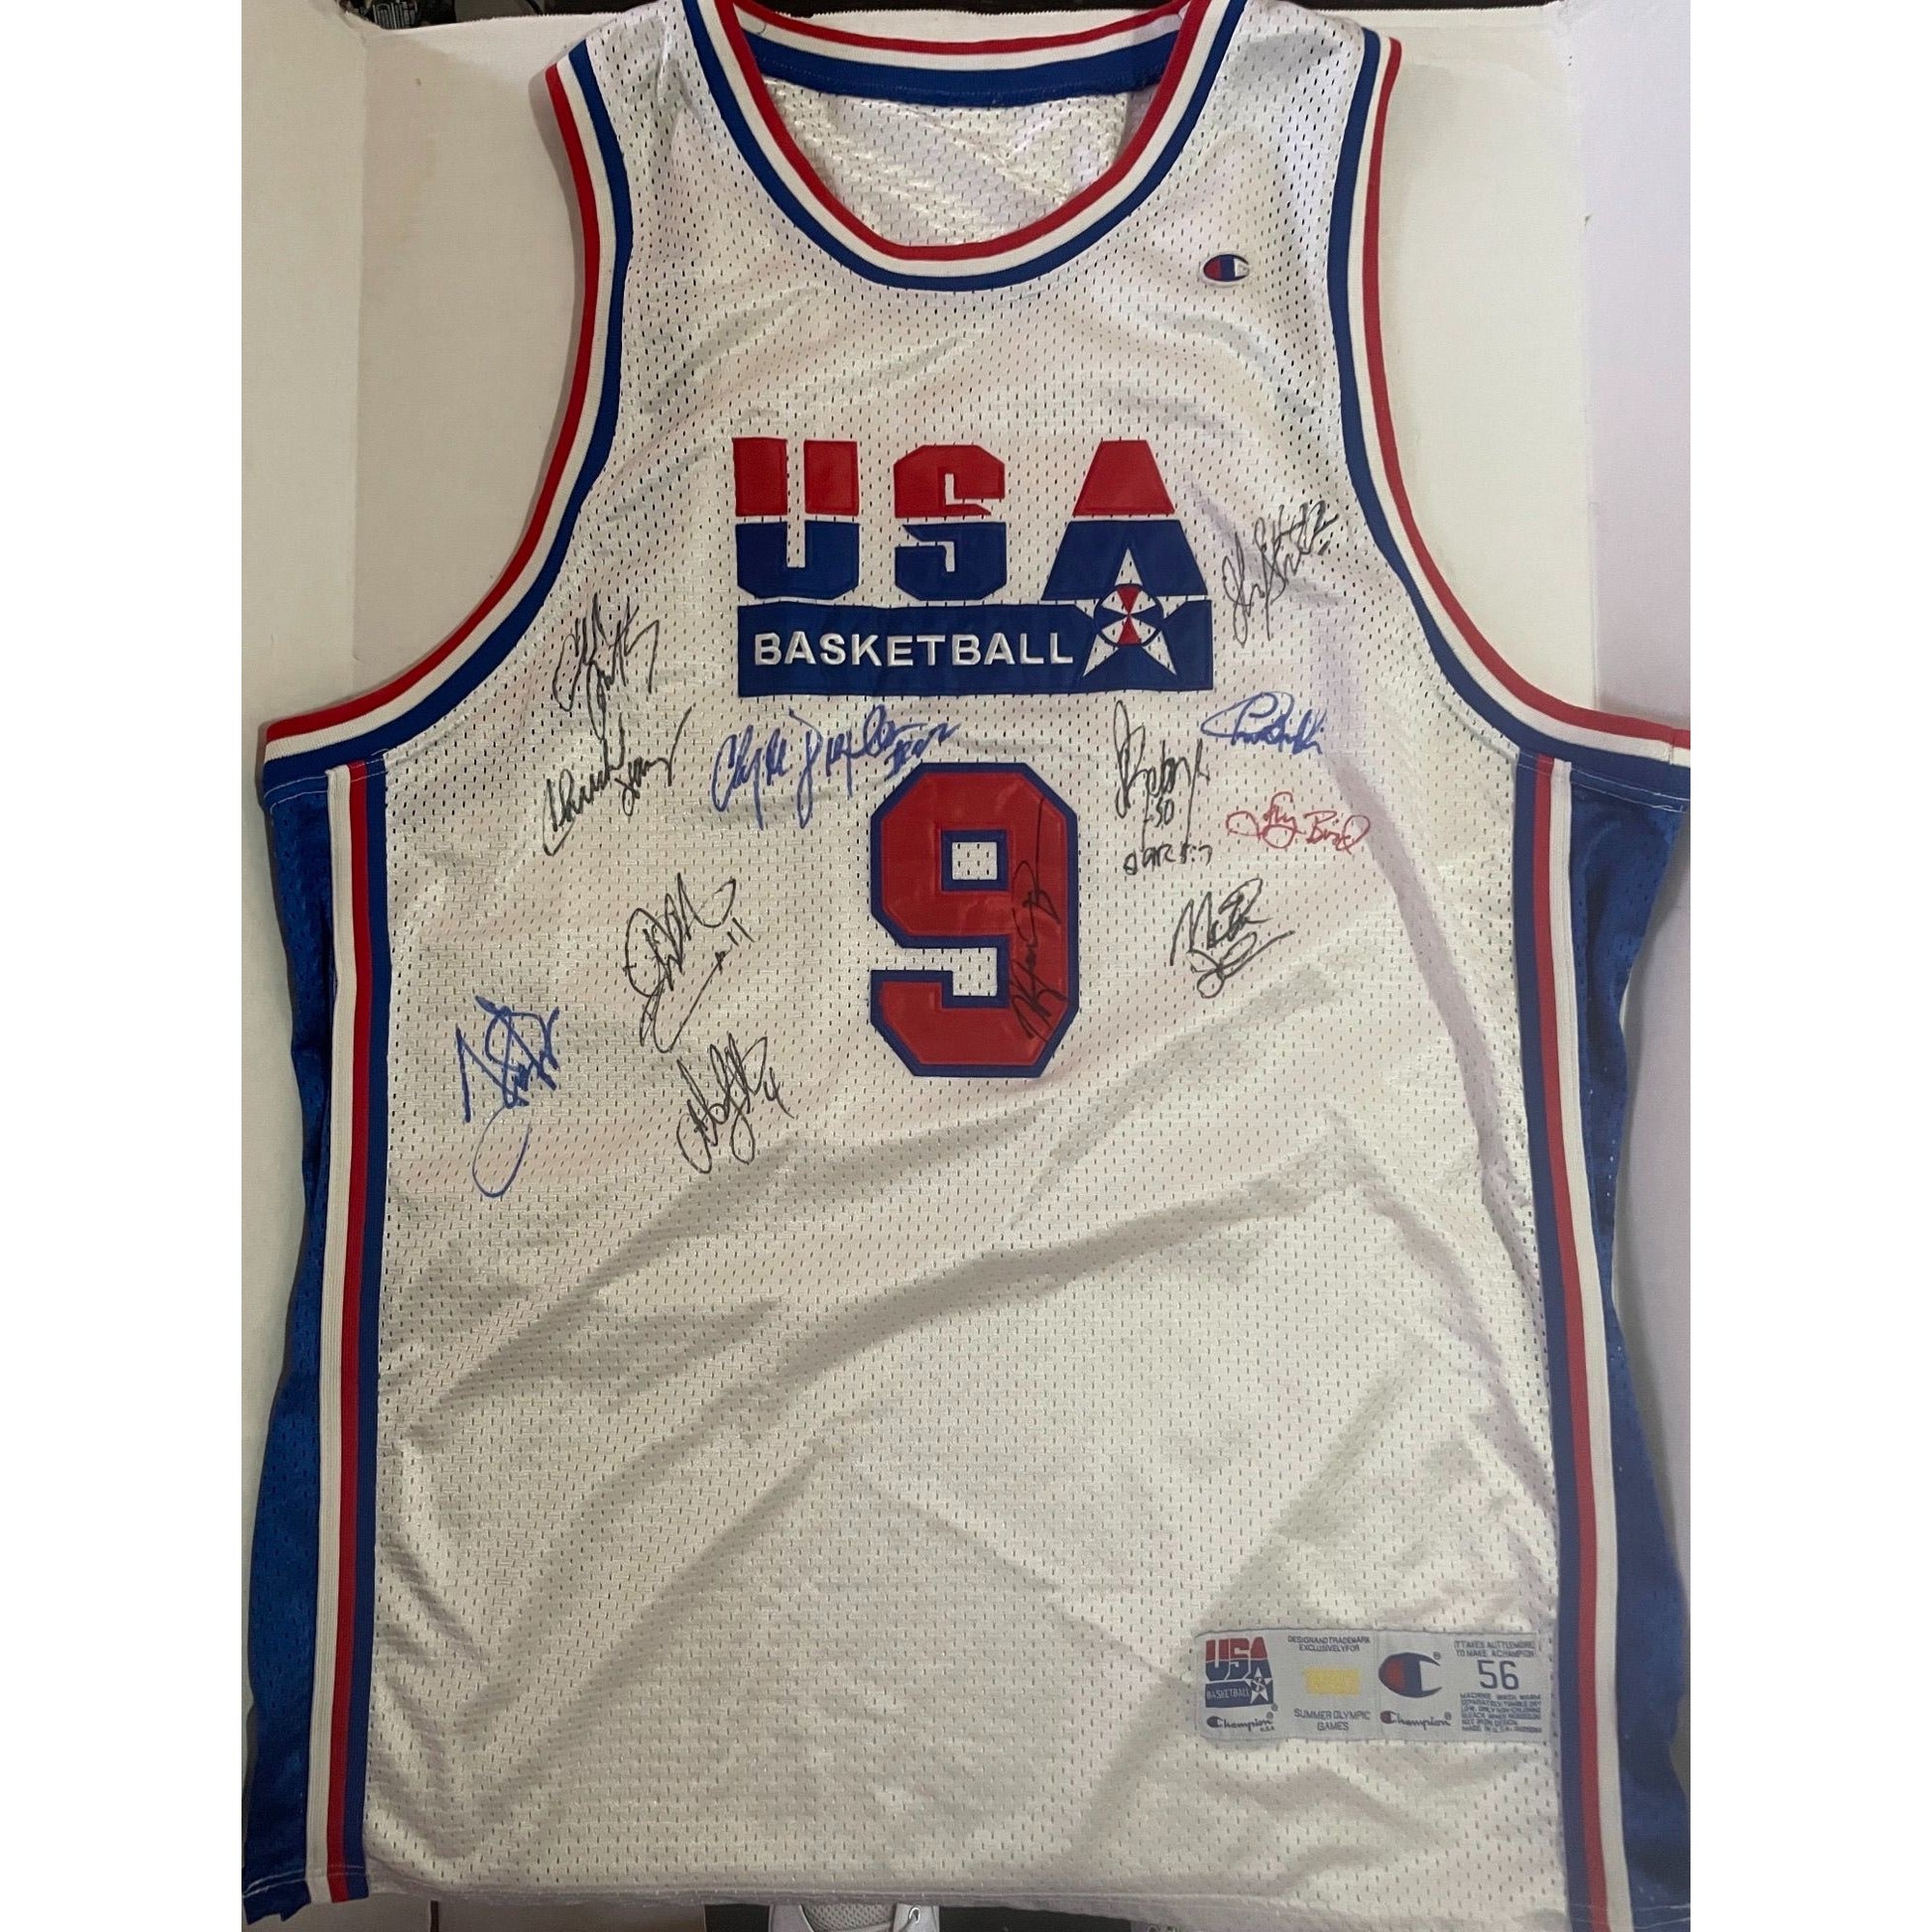 Sold at Auction: 2008 Team USA Multi-Signed Basketball Jersey With